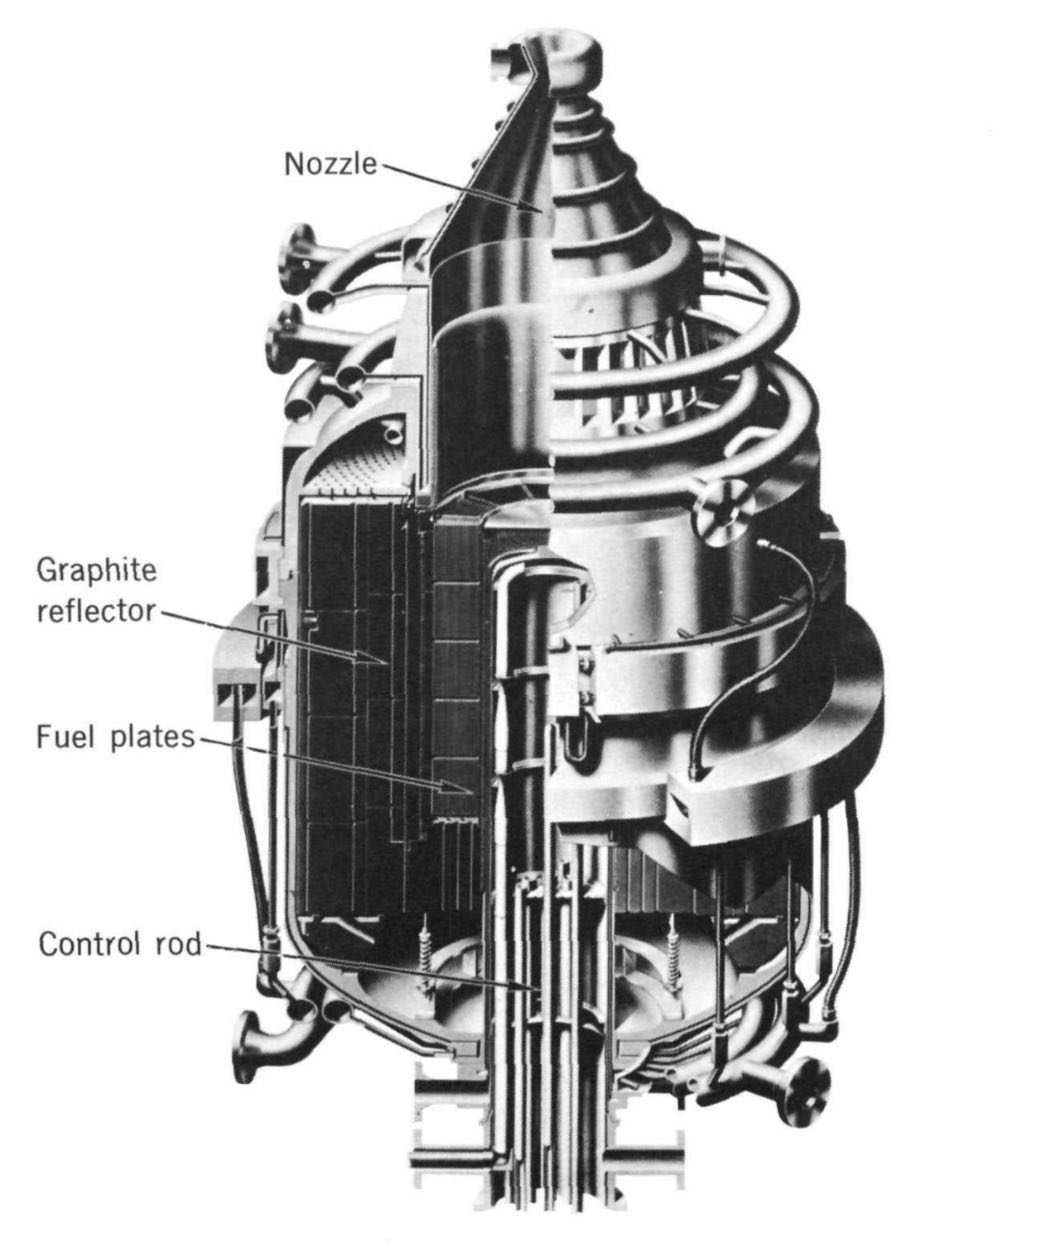 nuclear-powered spacecraft